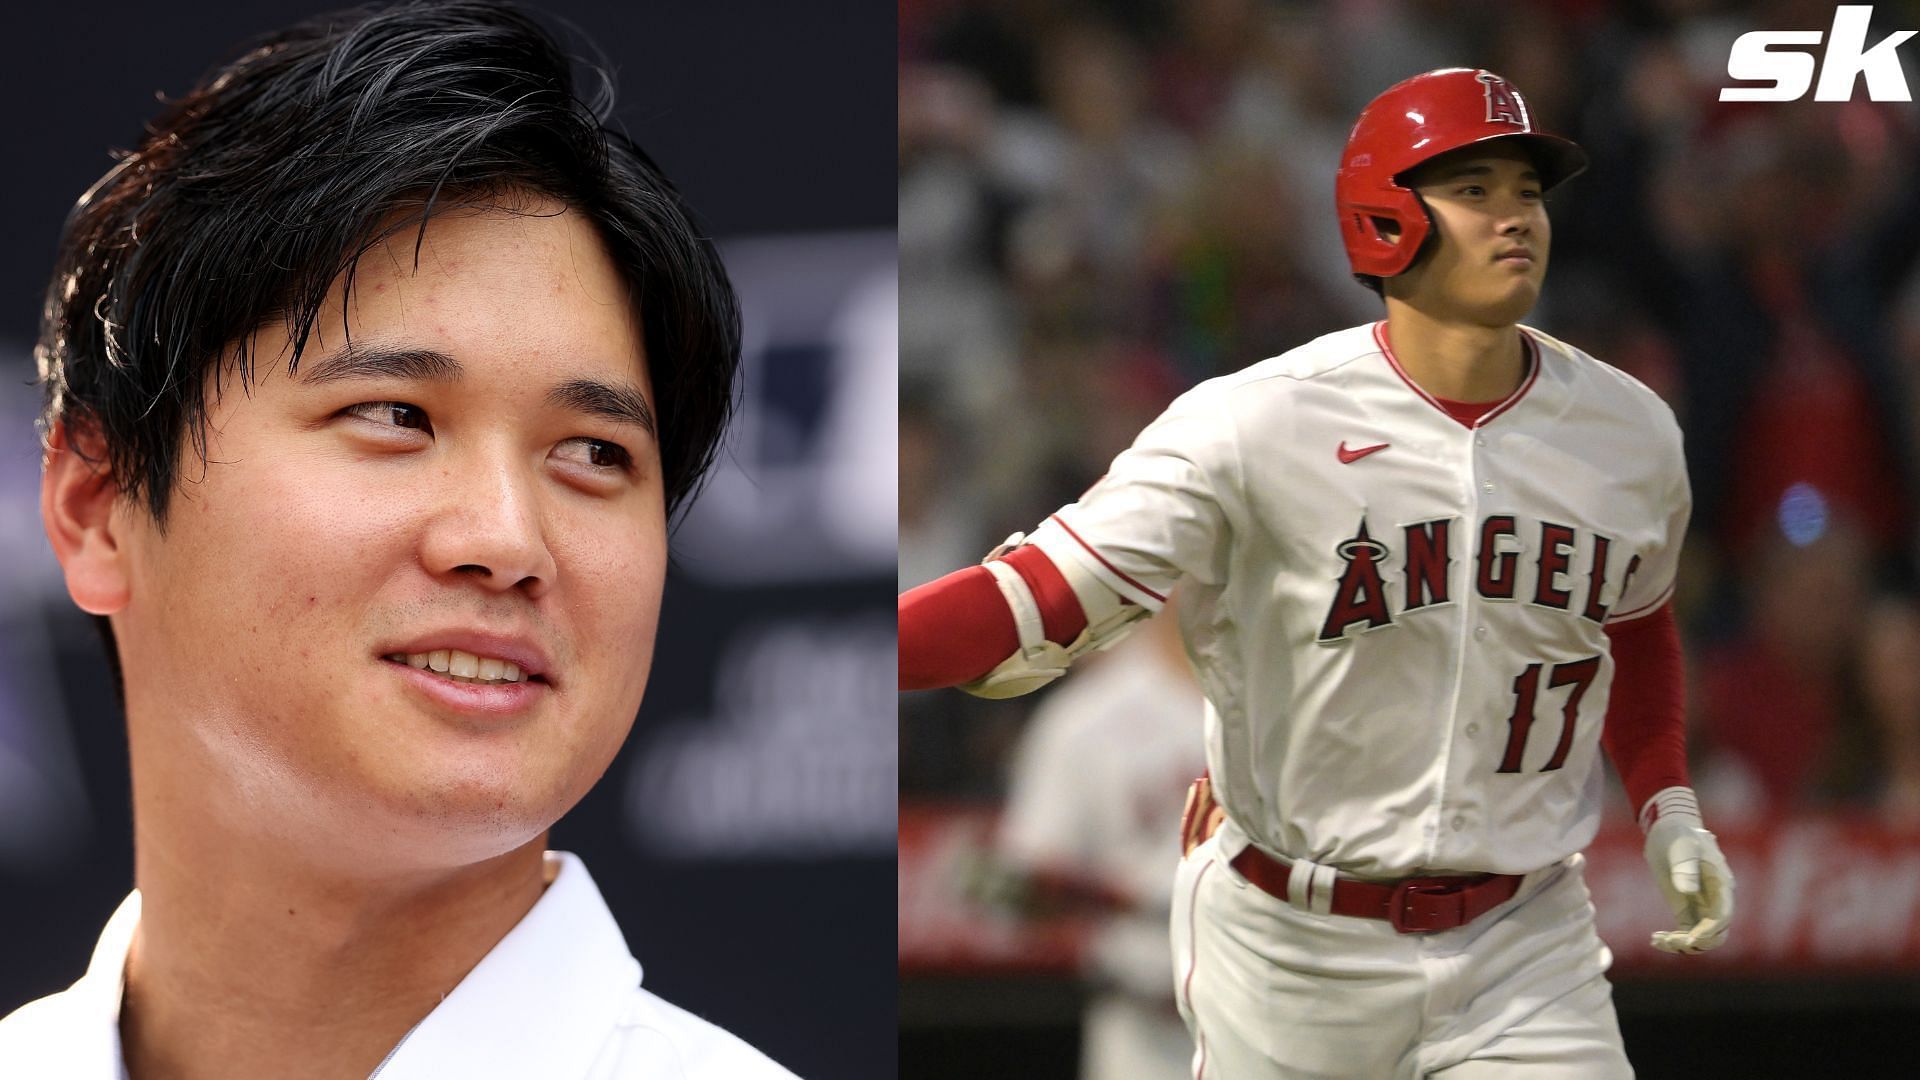 Shohei Ohtani continues to be one of baseball